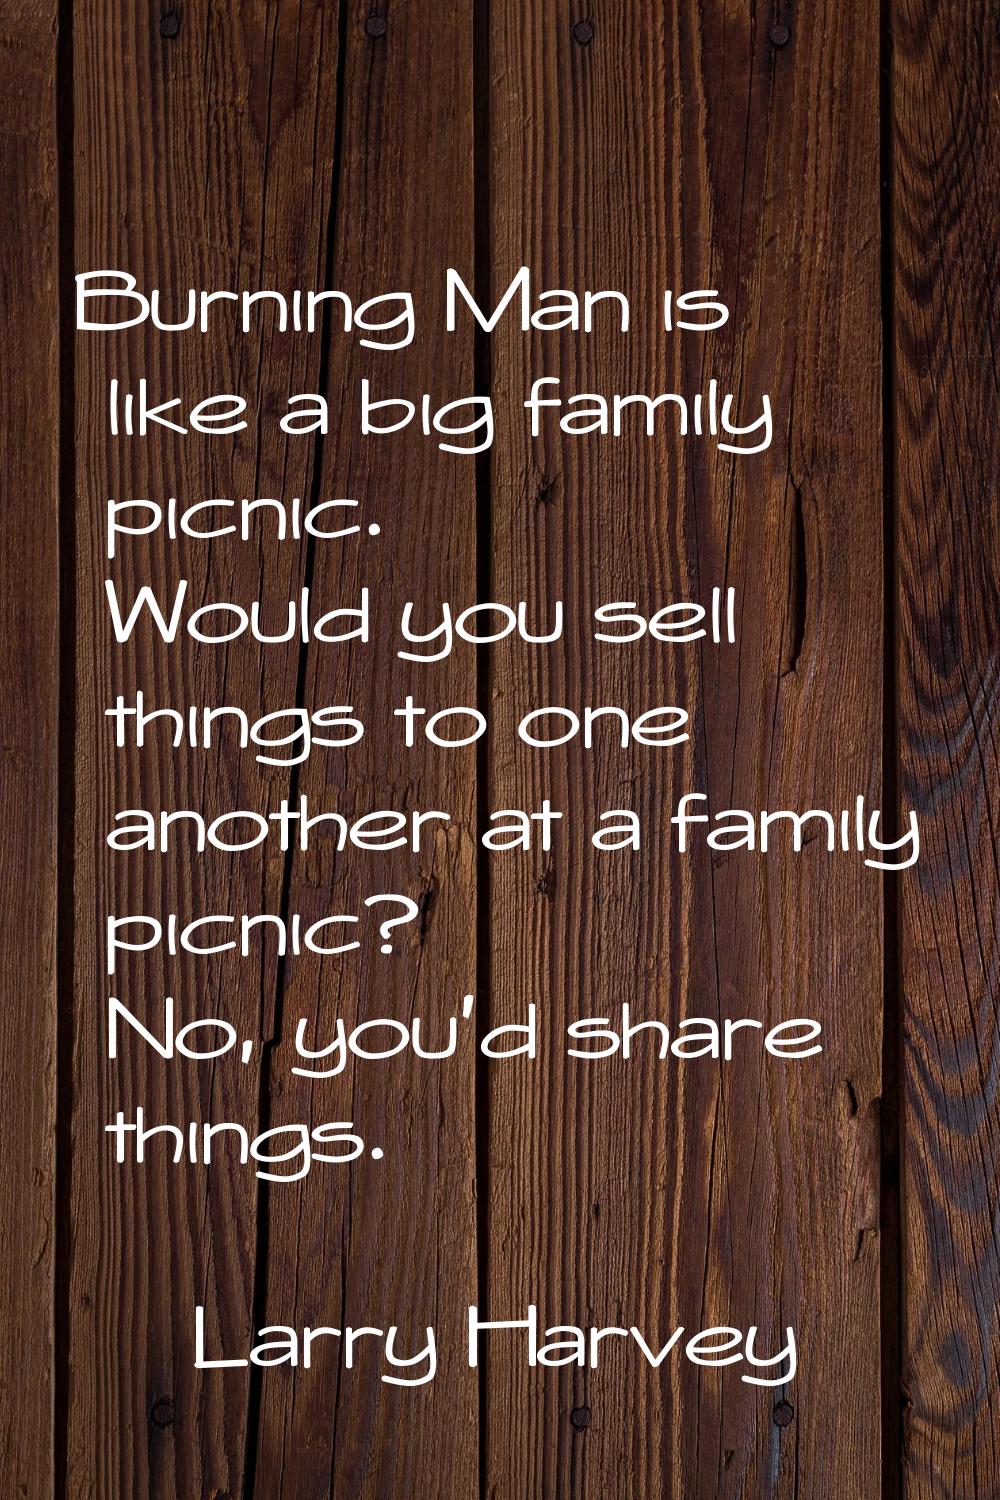 Burning Man is like a big family picnic. Would you sell things to one another at a family picnic? N